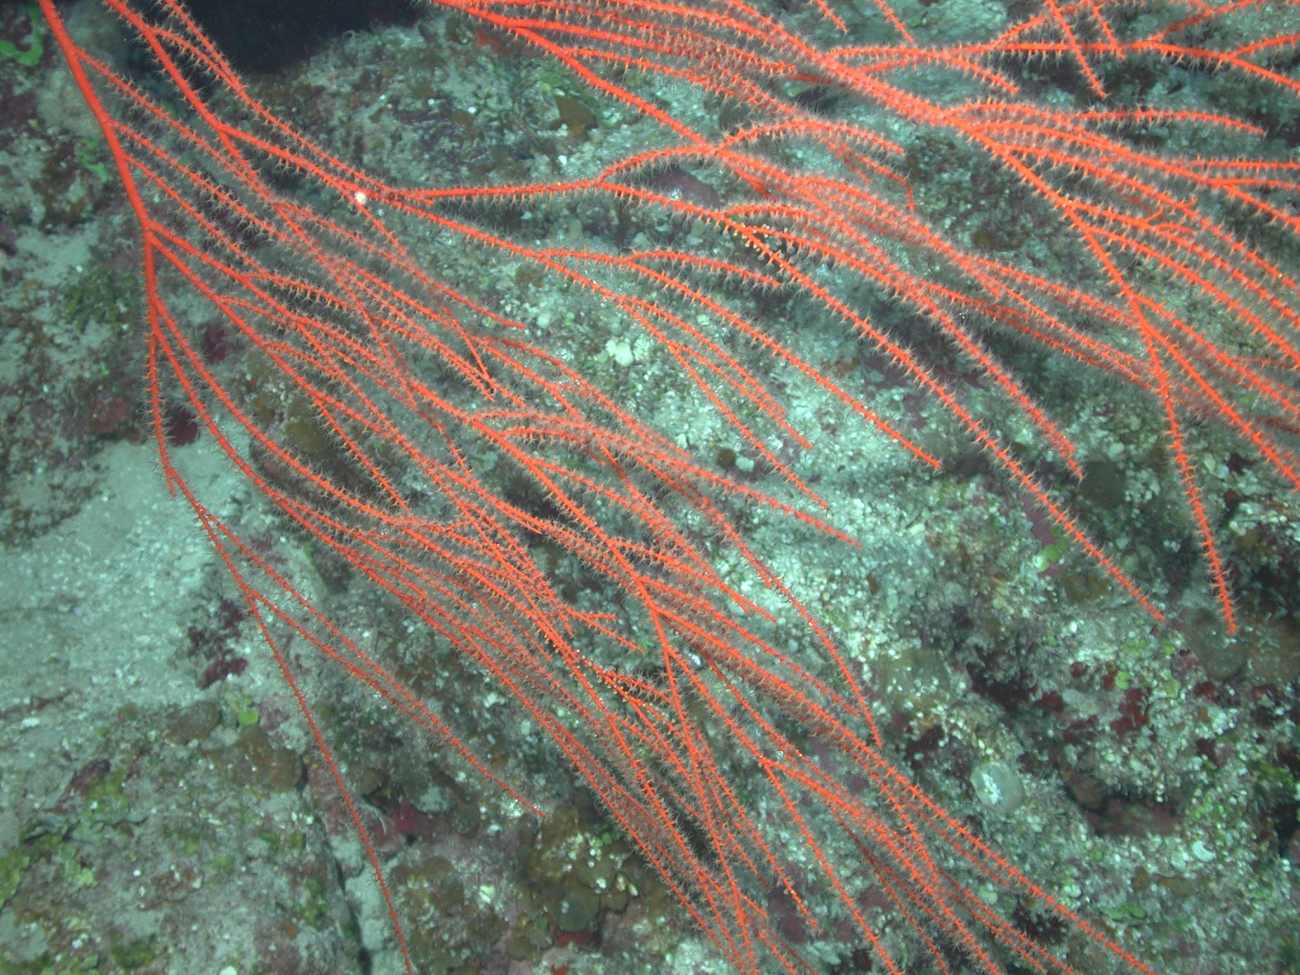 Several species of gorgonian octocorals occur on deep reefs